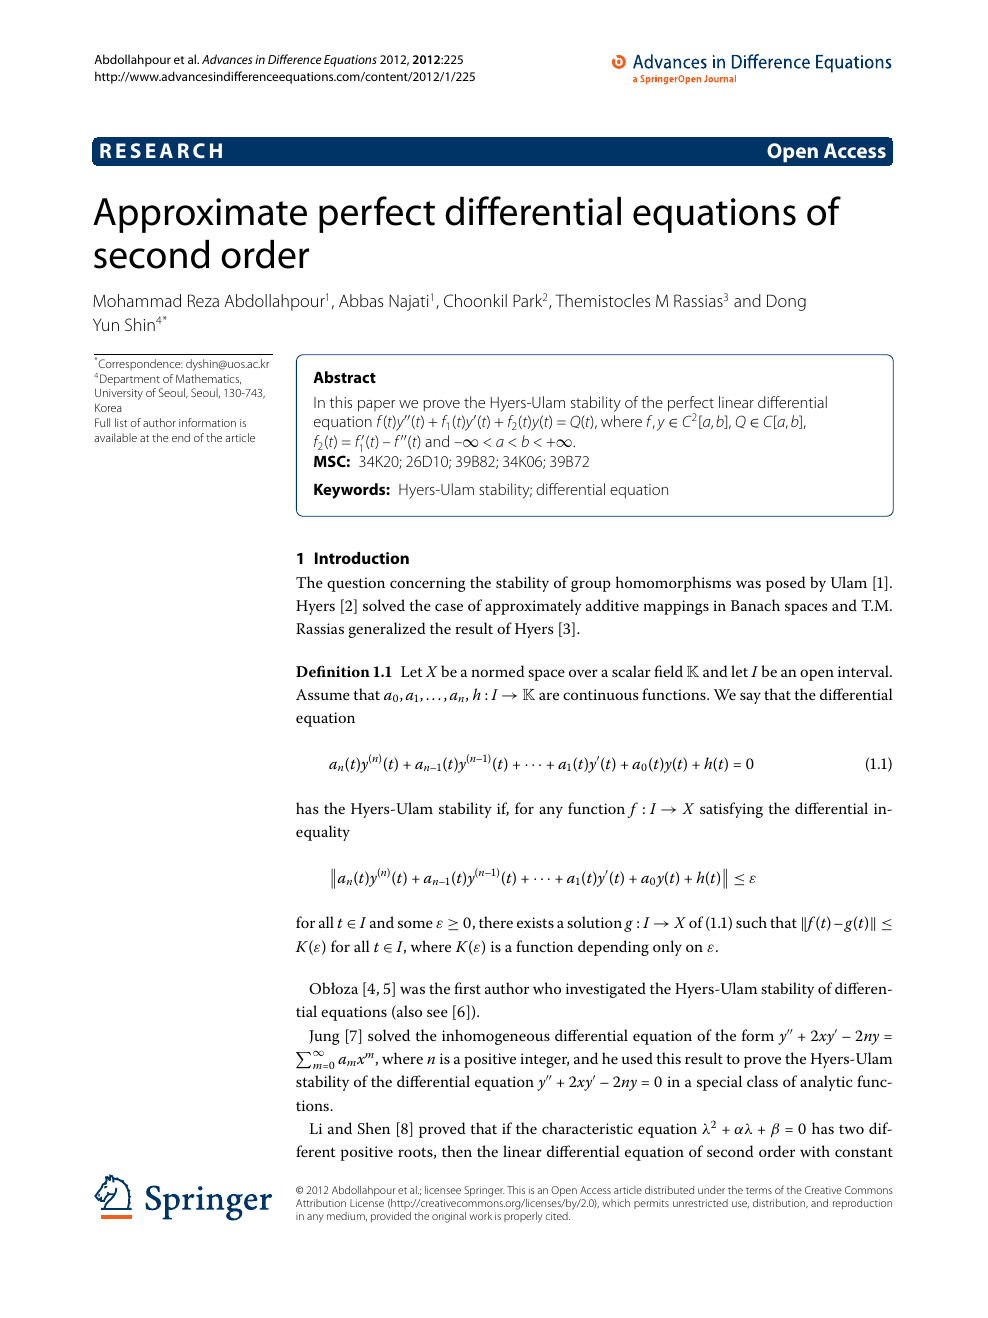 Approximate Perfect Differential Equations Of Second Order Topic Of Research Paper In Mathematics Download Scholarly Article Pdf And Read For Free On Cyberleninka Open Science Hub